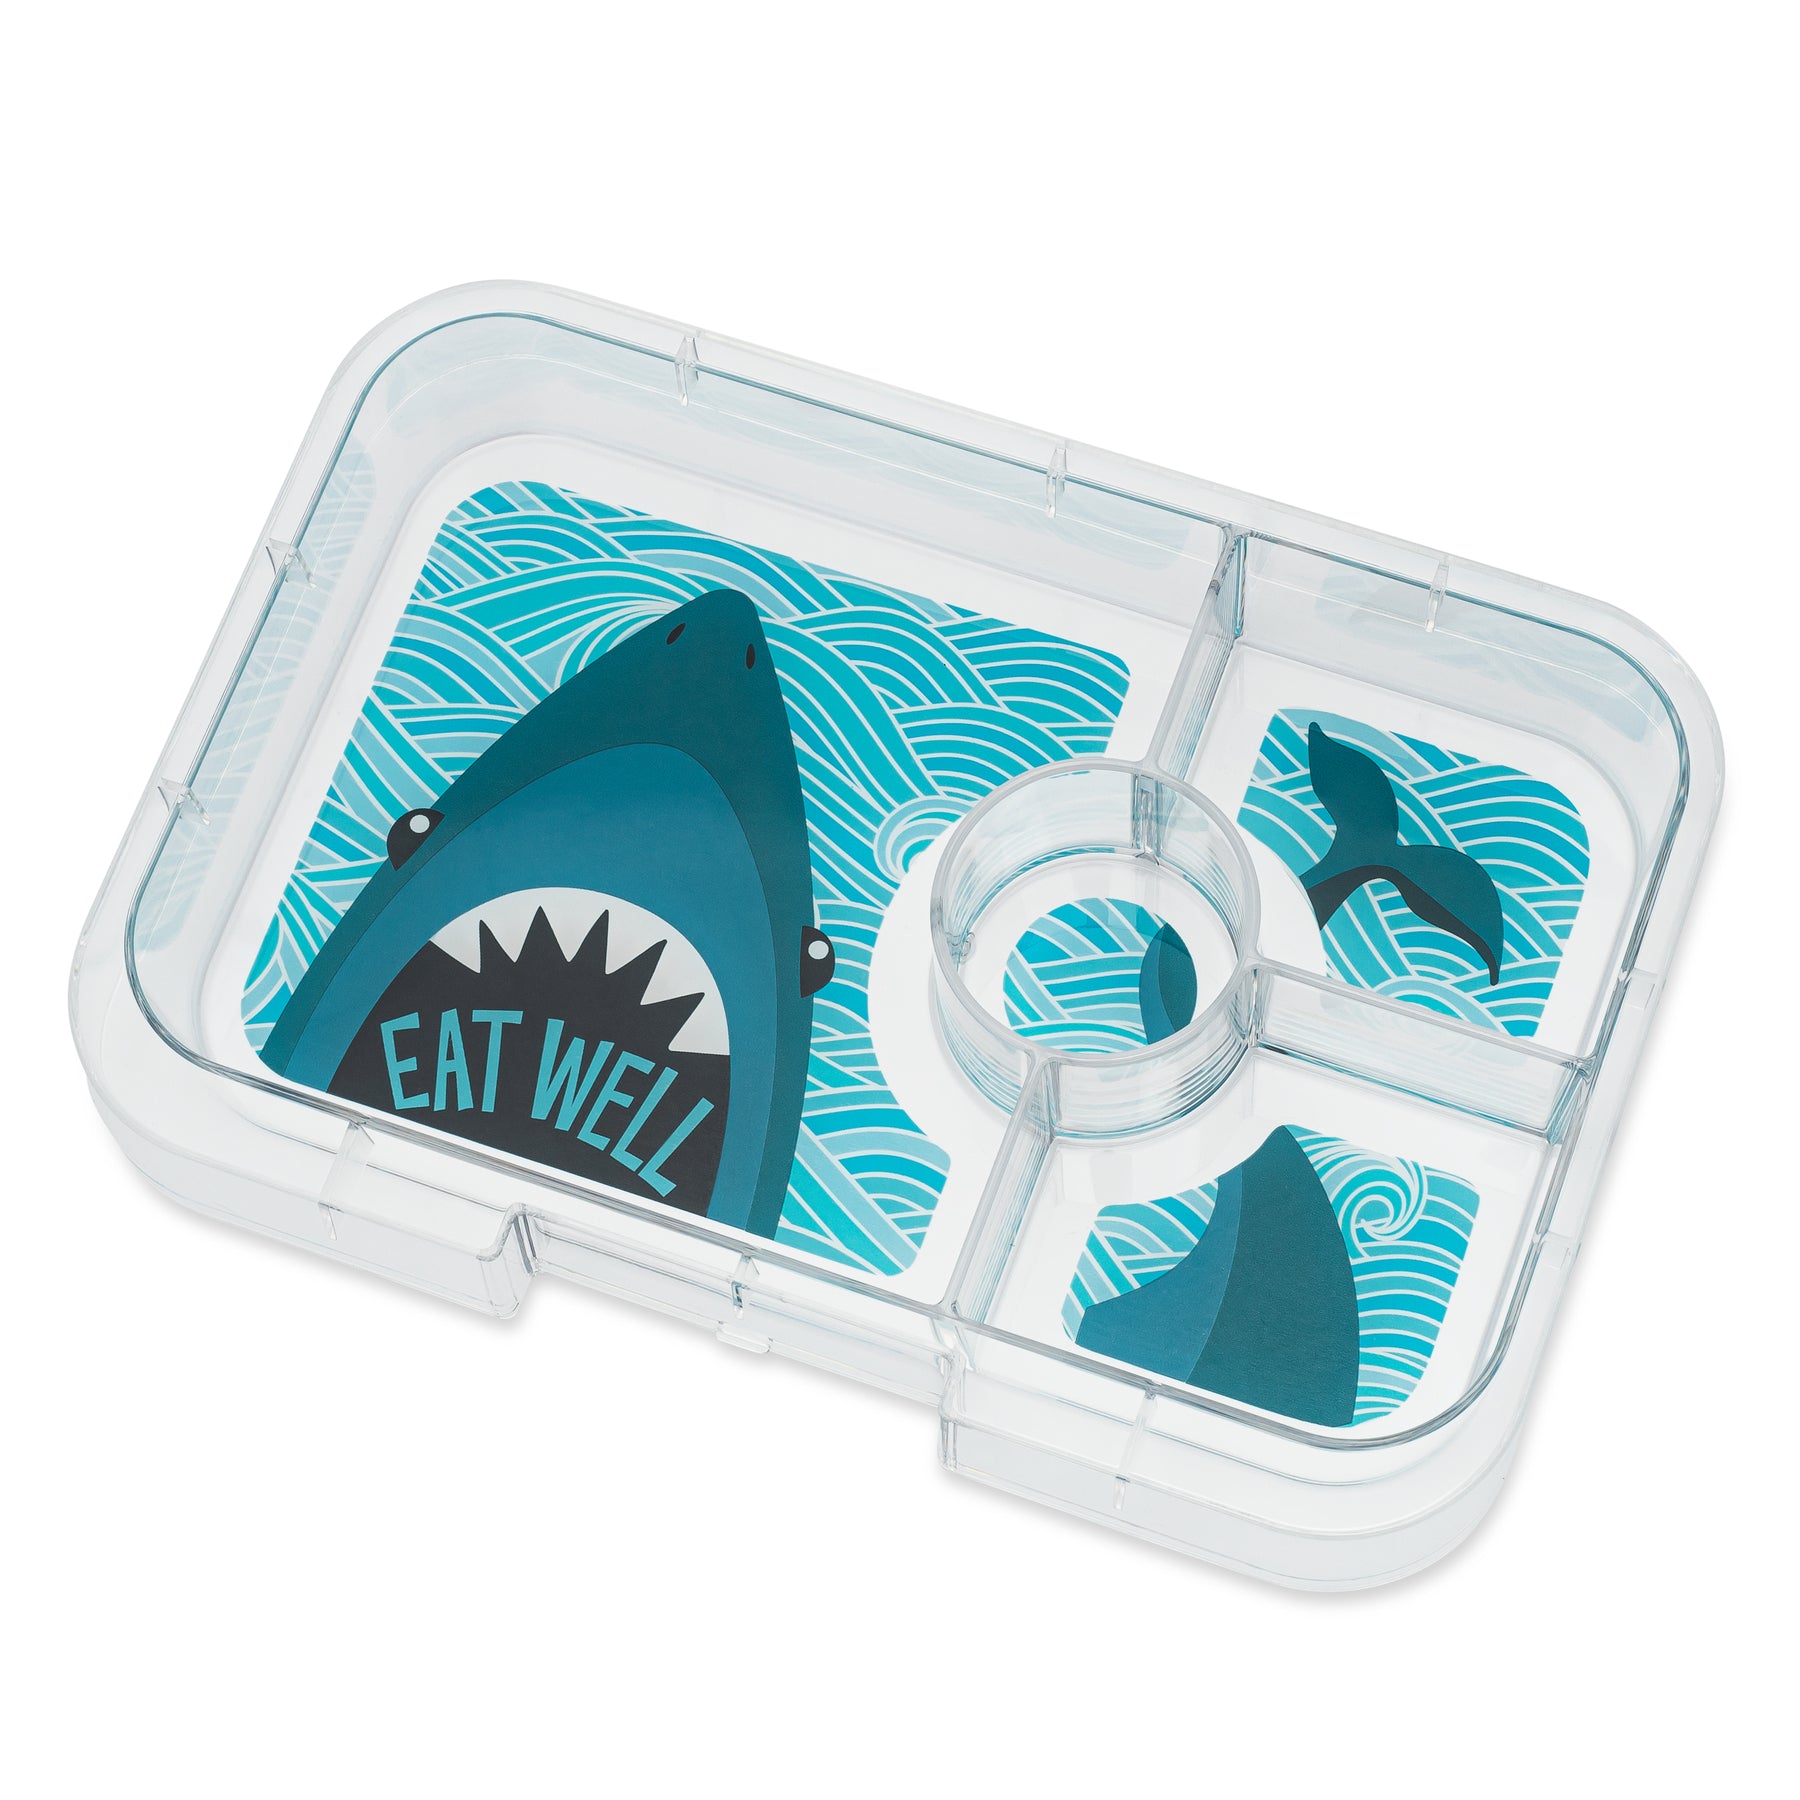 Leakproof Yumbox Tapas Bento Lunch Box - 5 Compartment - True Blue with  Groovy Tray